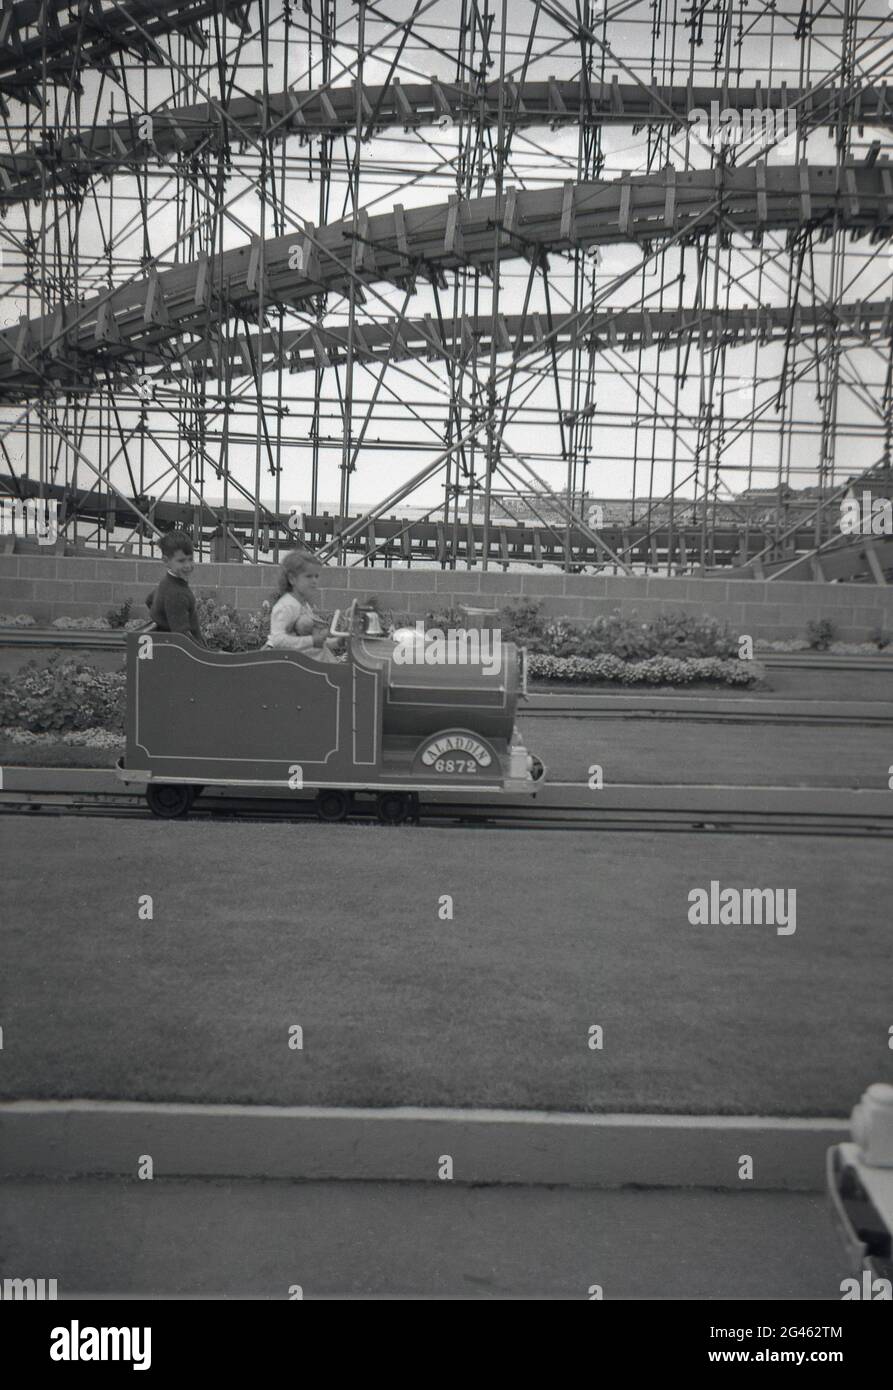 1962, historical two young children on a funfair train ride at Clacton-on-Sea, Essex, England, UK, with the big dipper of Clacton Pier in the background. Stock Photo